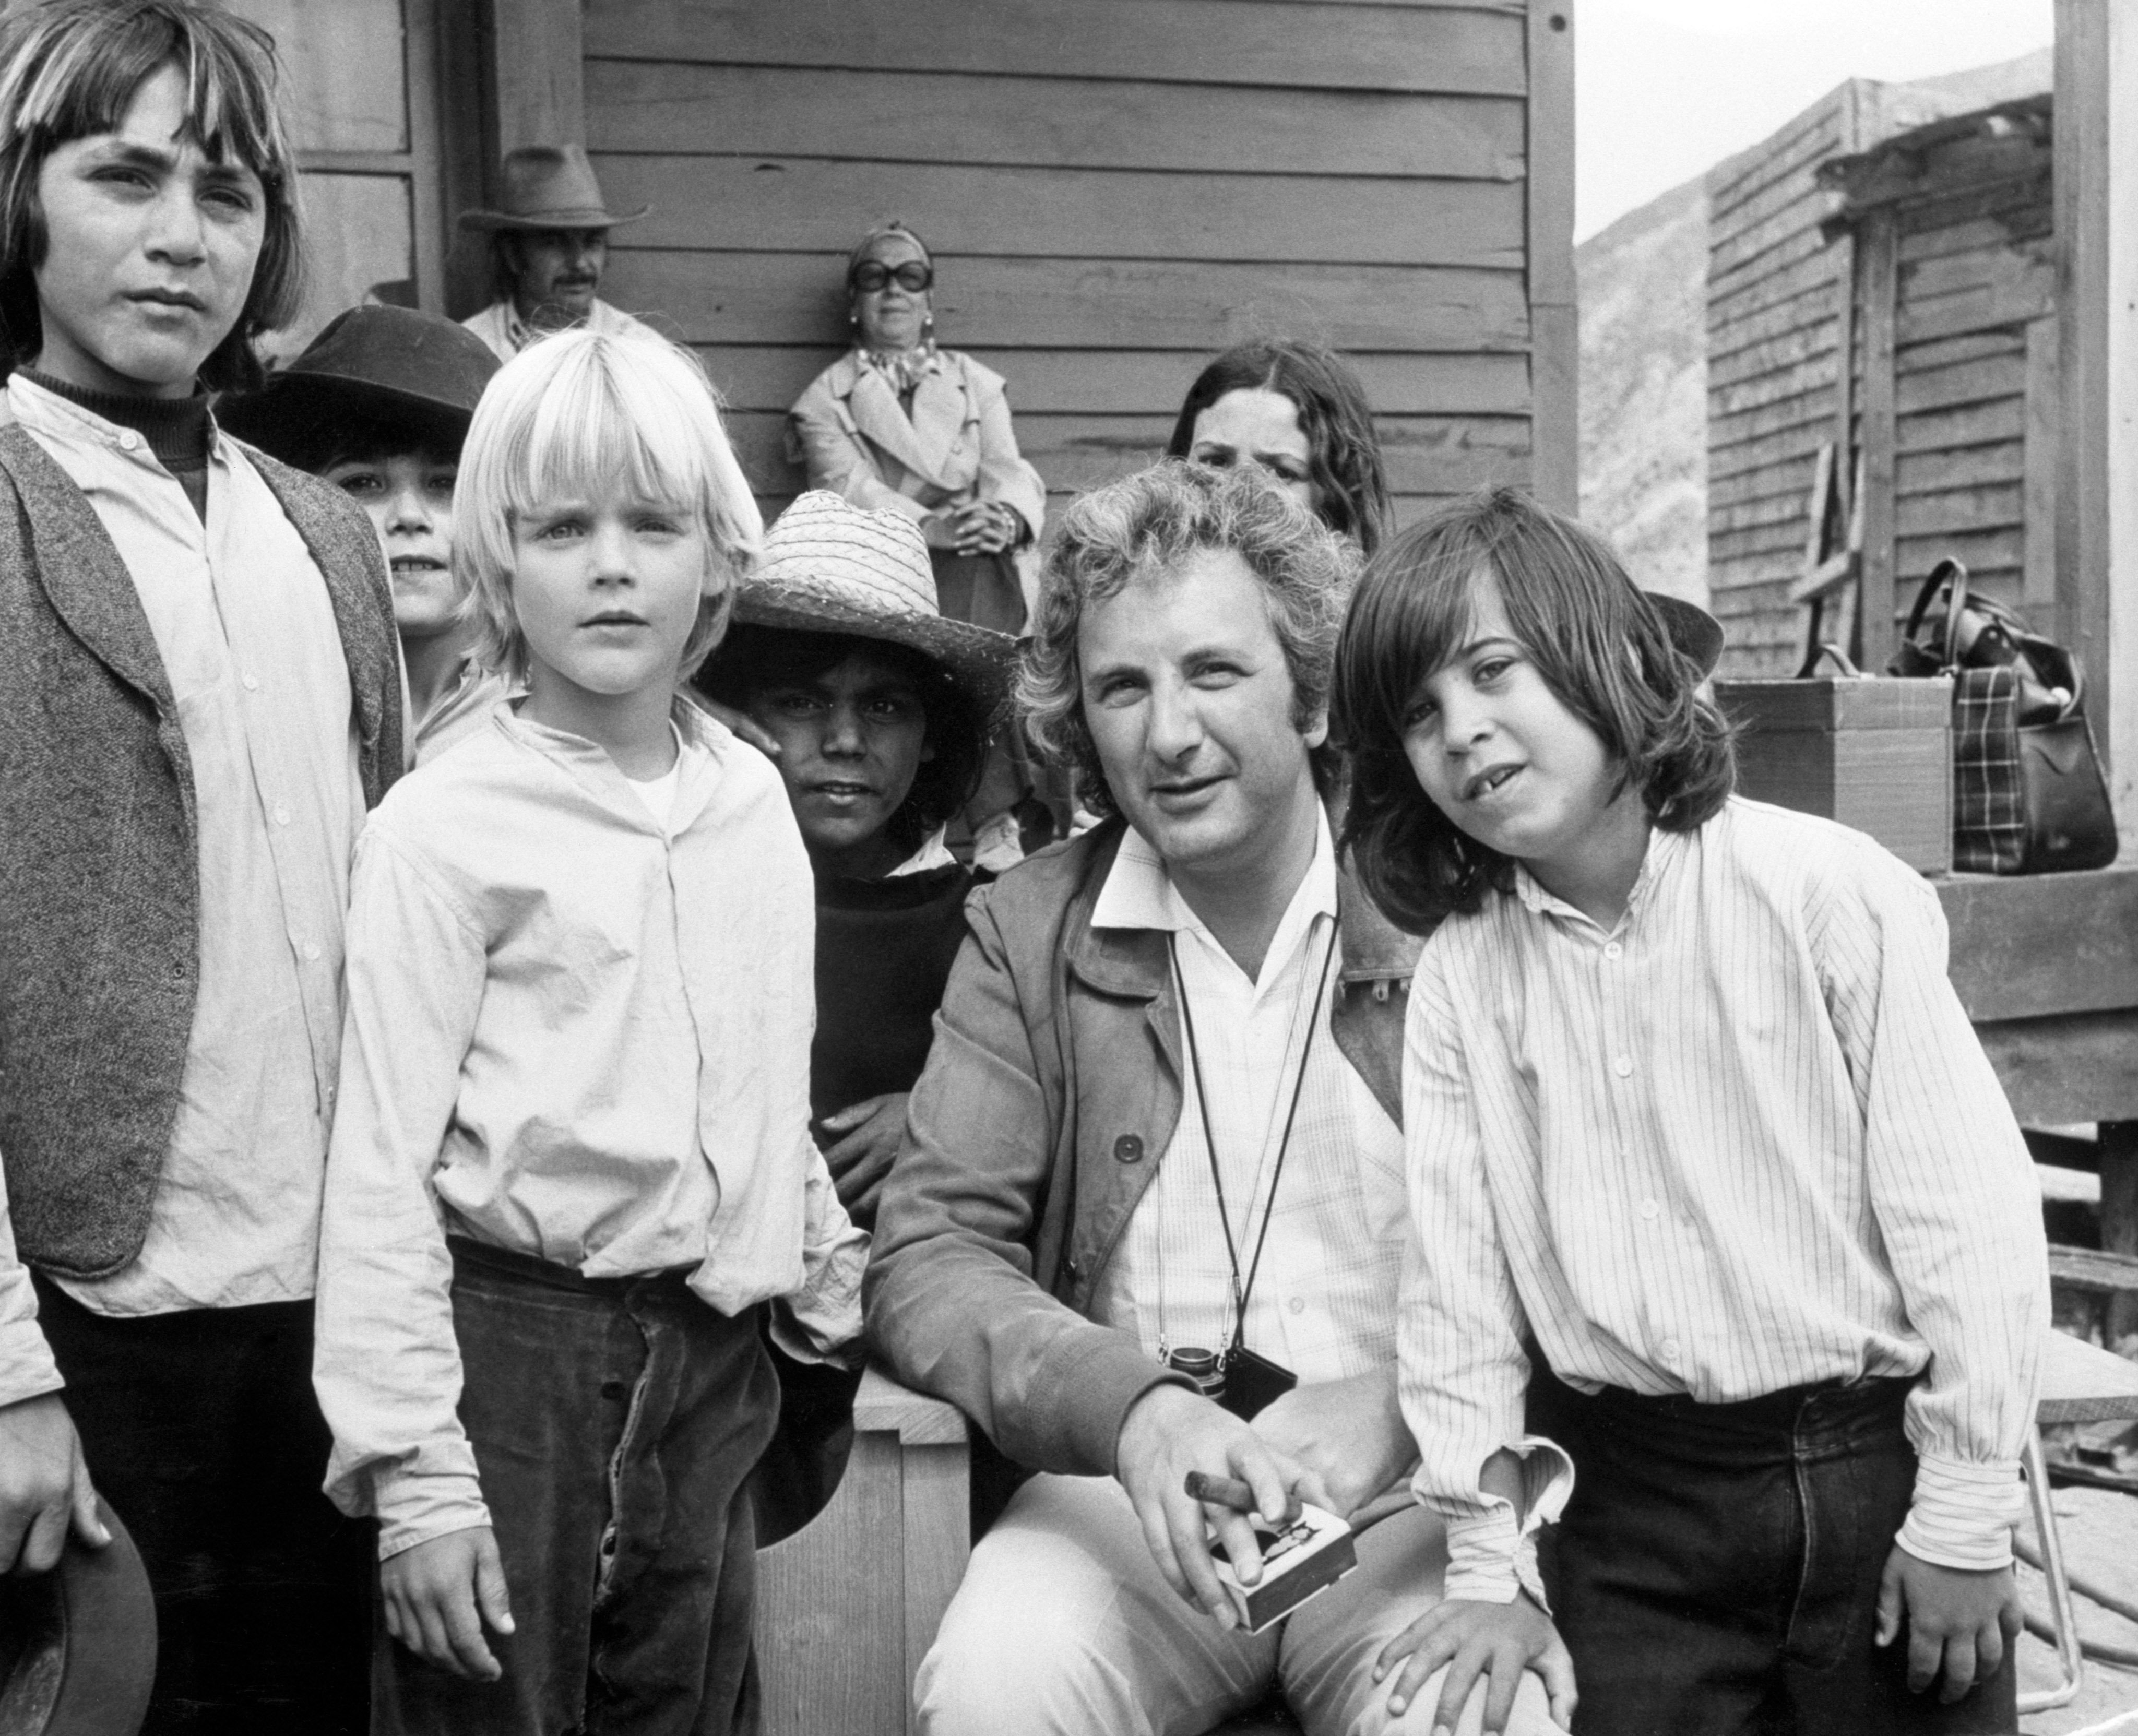 Michael Winner on the set of his western Chato's Land, which stars Charles Bronson. Two of the young actors with him, Jason (right) and Valentine (blond, centre), are sons of British actors Jill Ireland and David McCallum. | Source: Getty Images